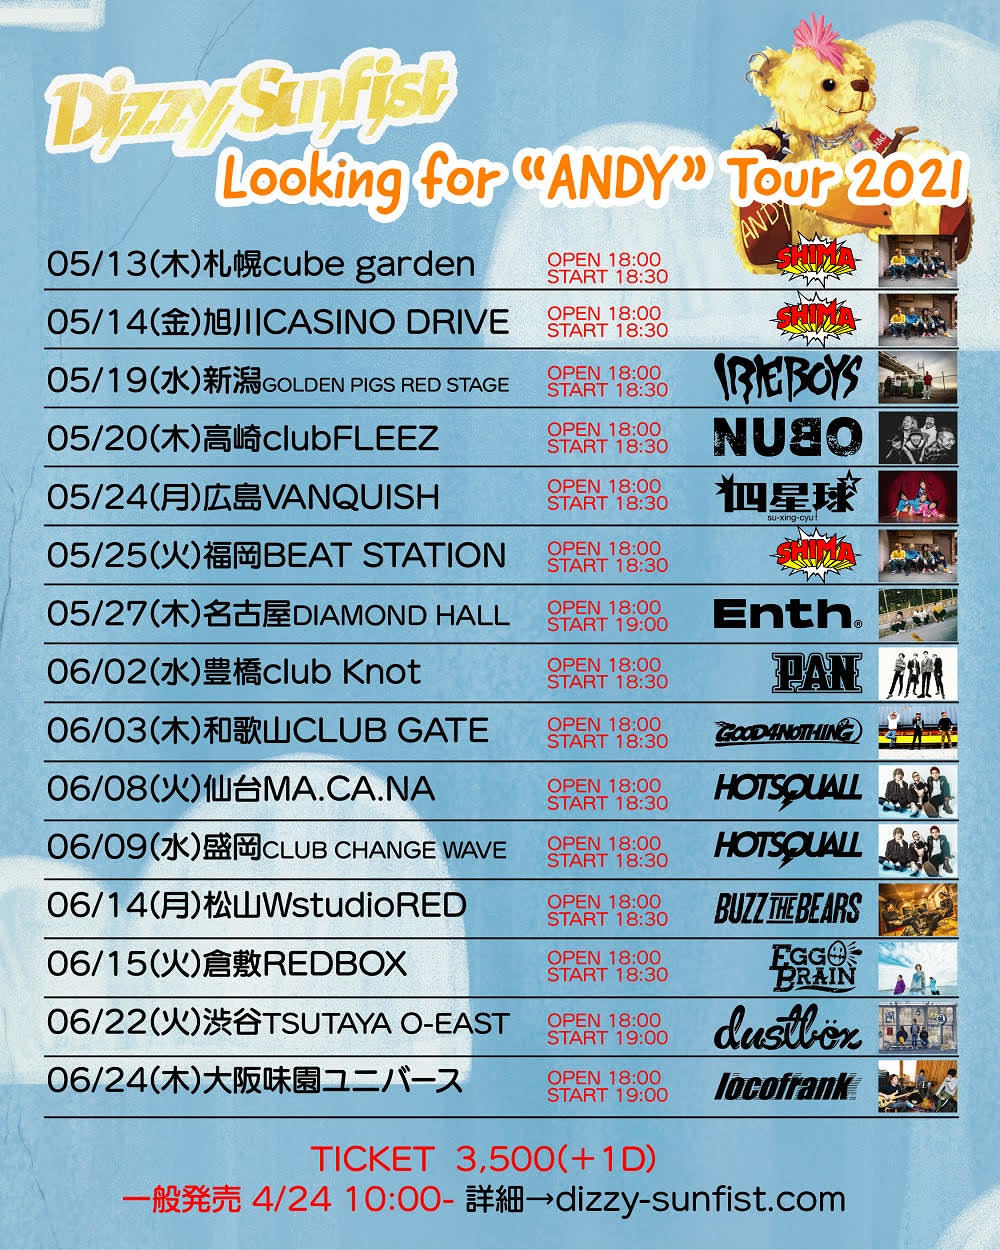 『Dizzy Sunfist Looking for “ANDY” Tour 2021』